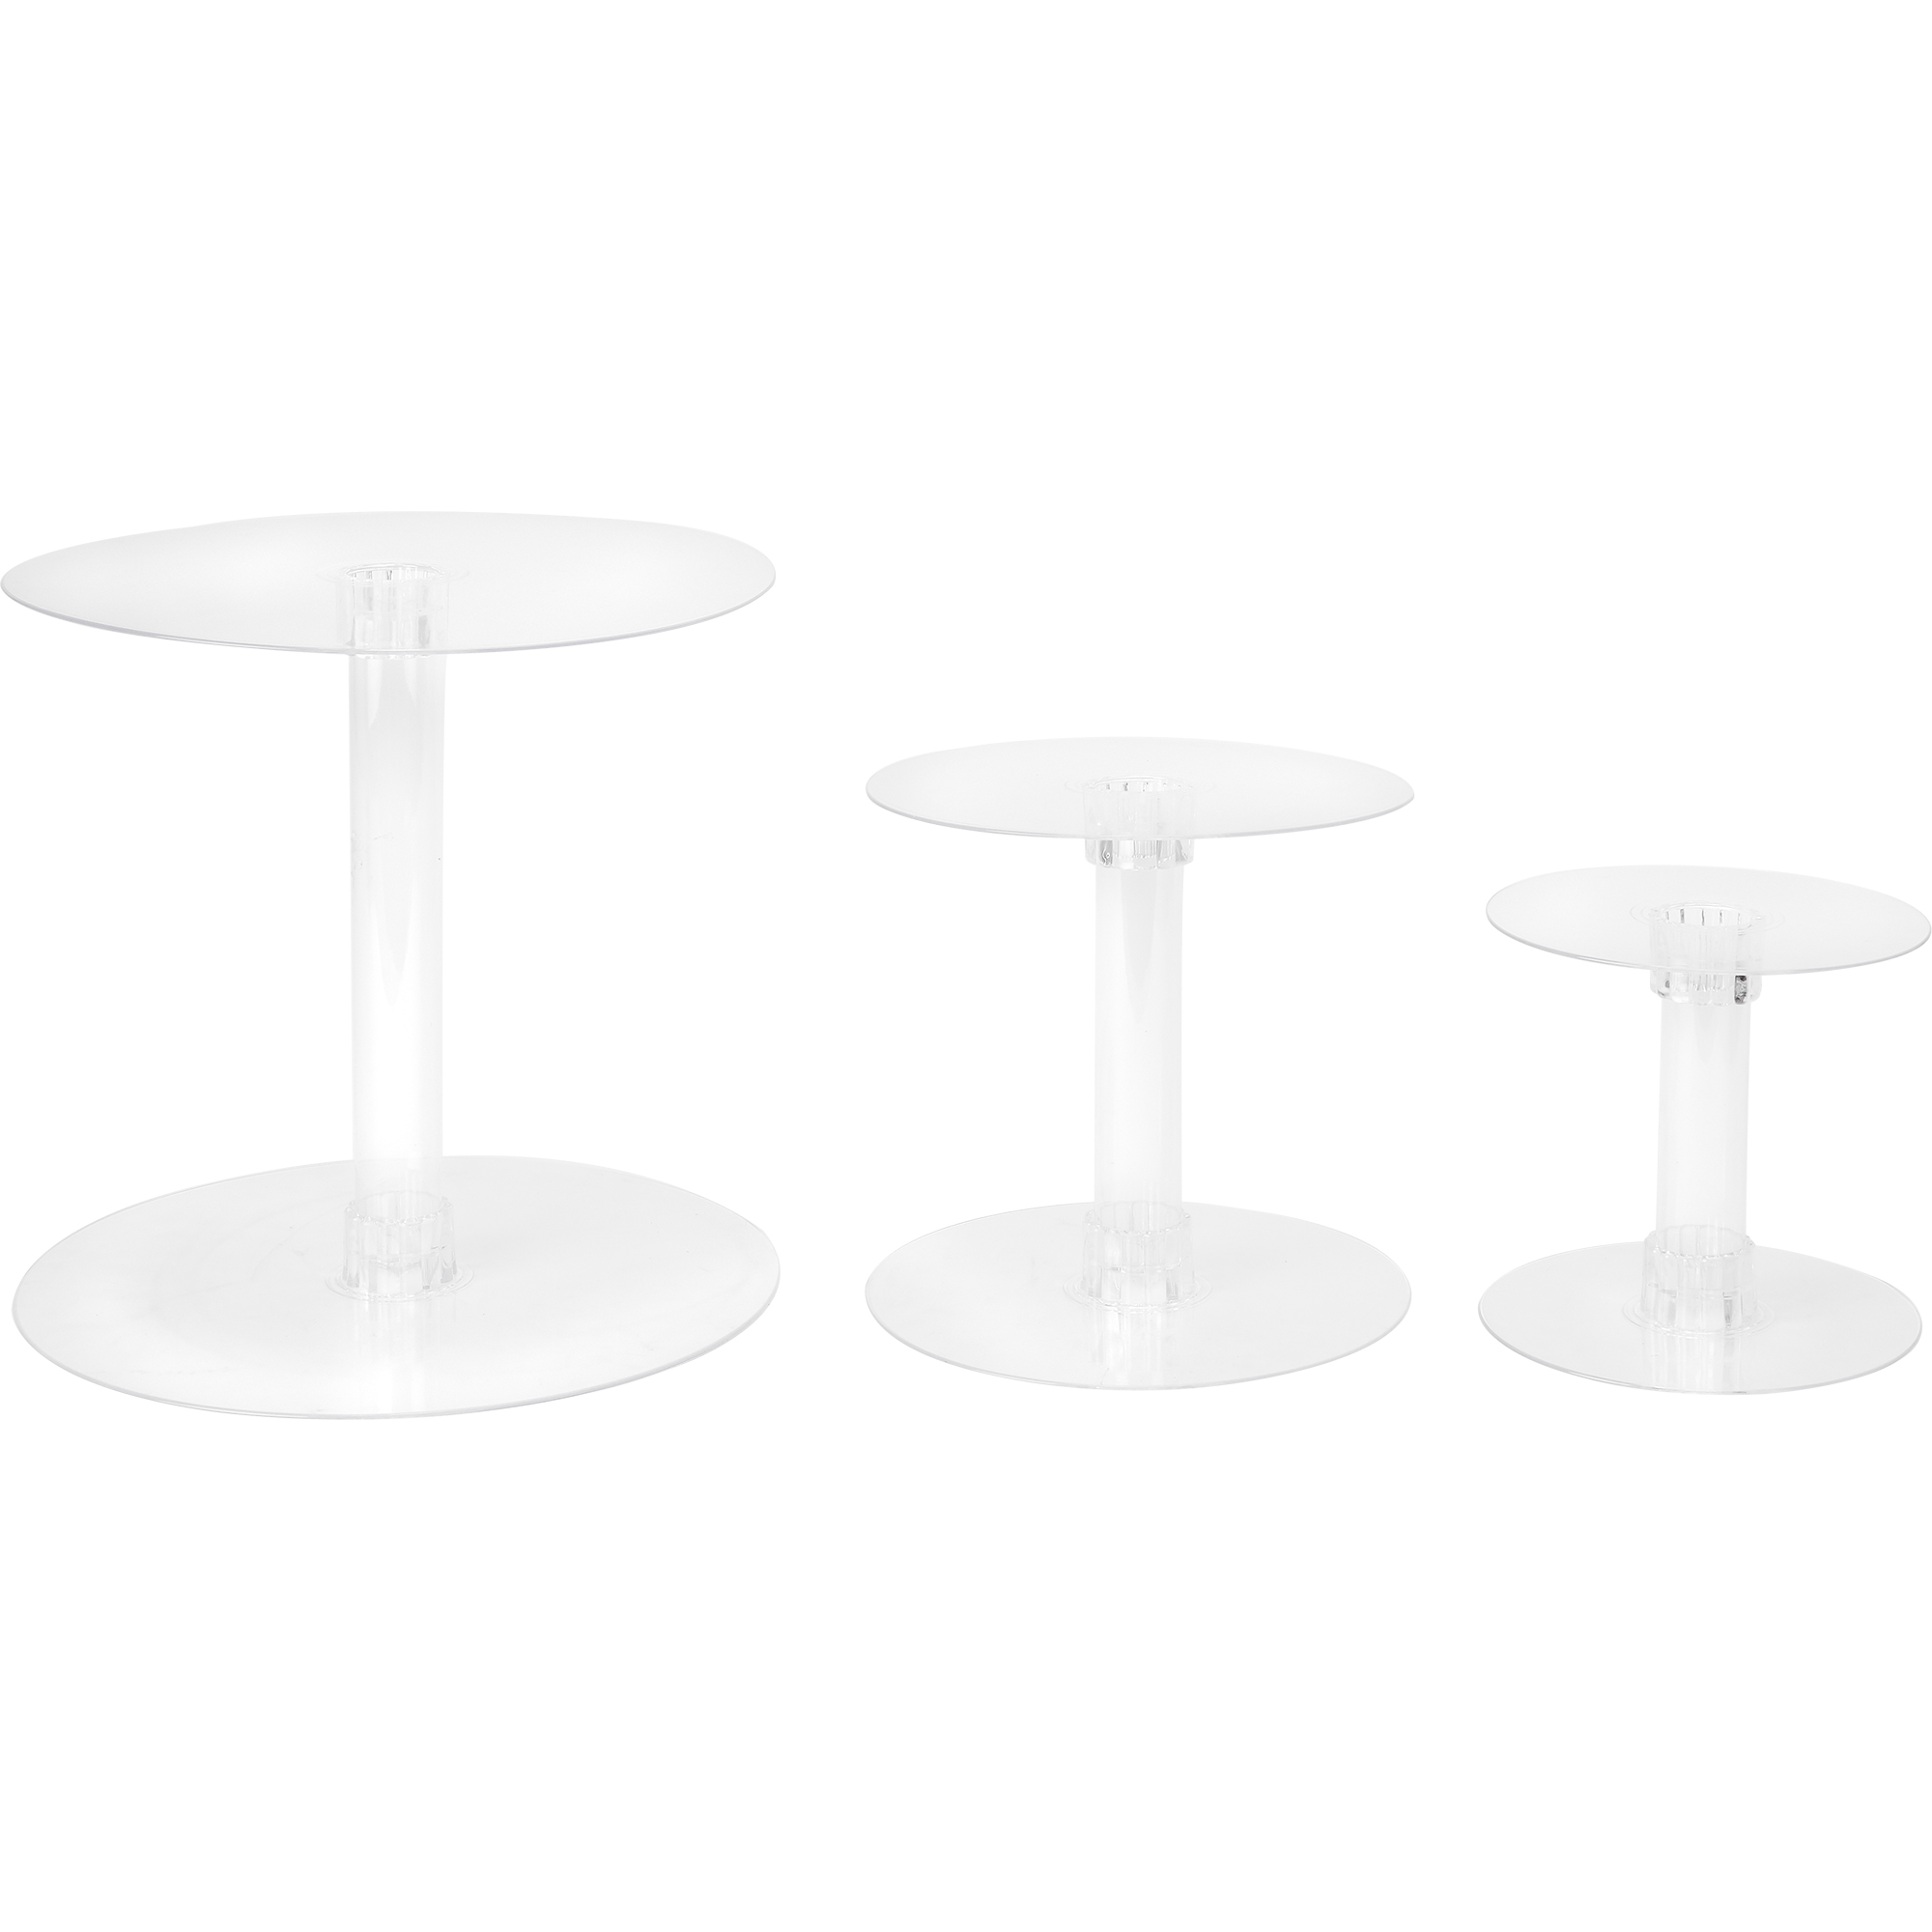 Plastic Plate Cake Stands 3pc/set